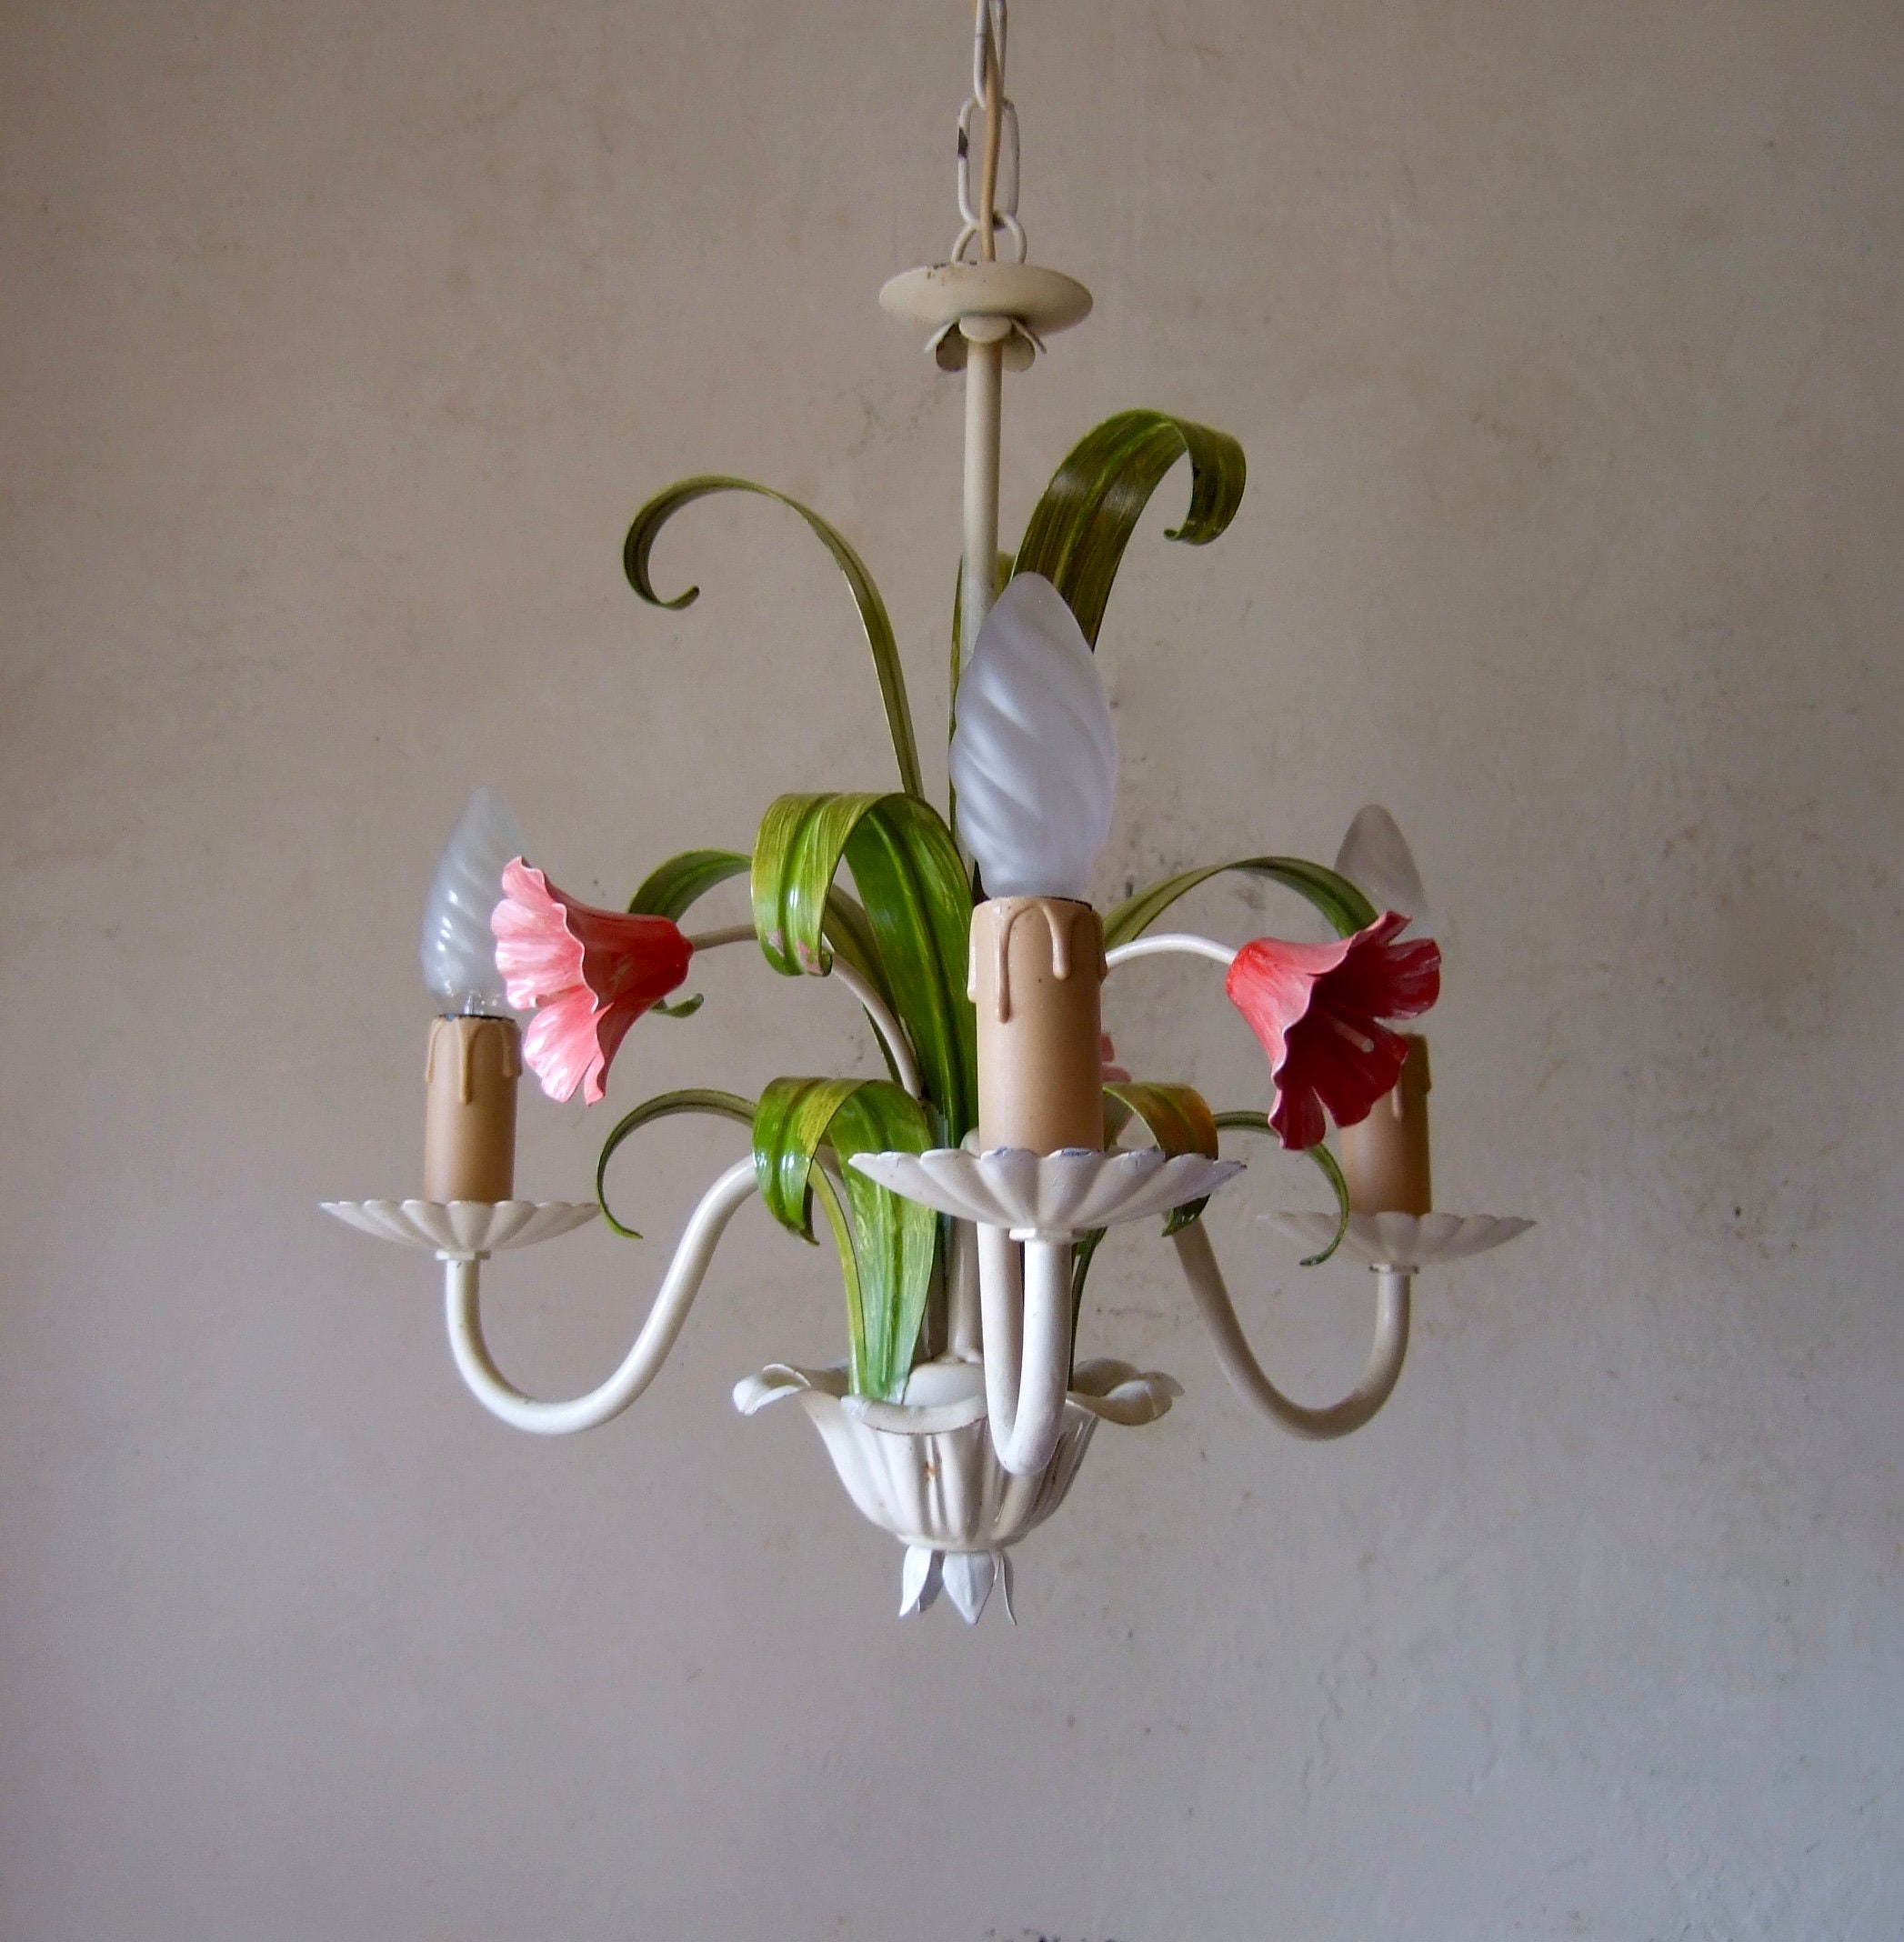 1960s Tole Metal Floral Lamp by Leviton Shabby Chic MCM 